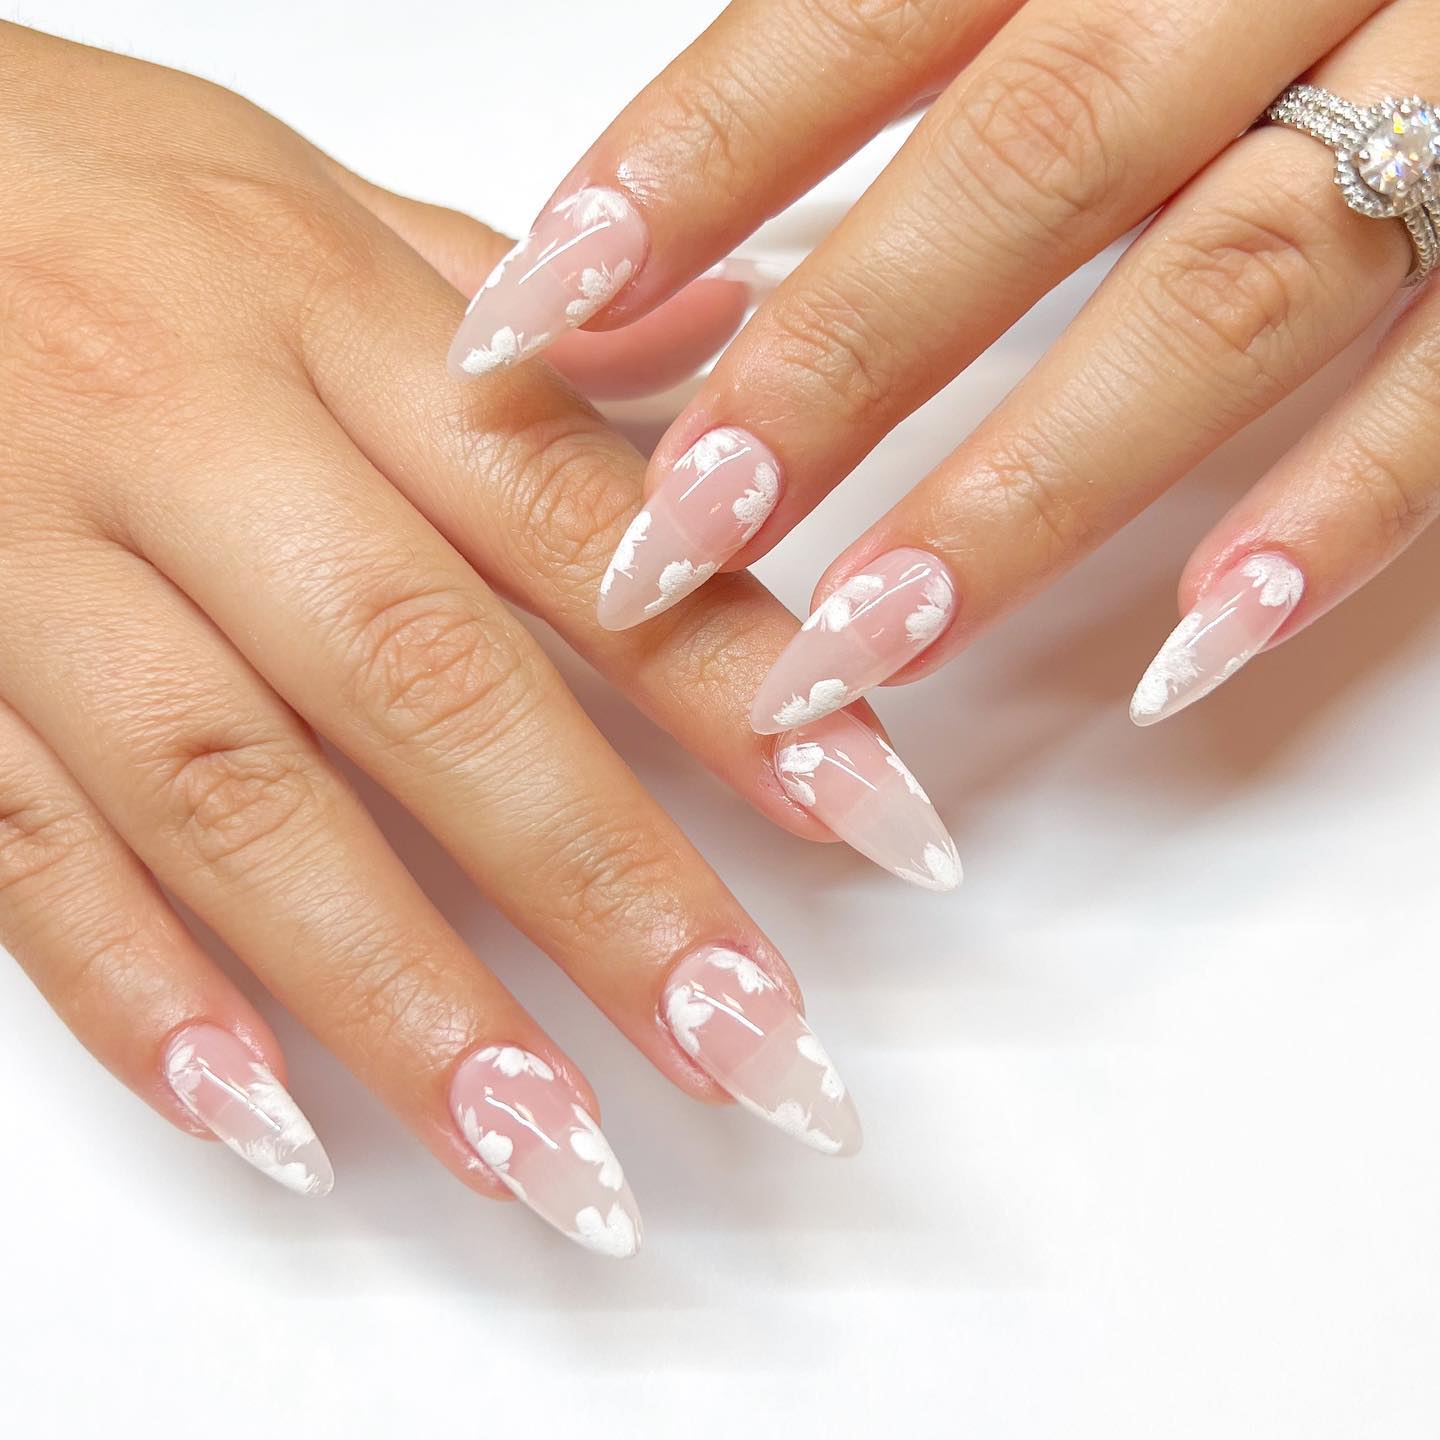 Short Stiletto Nails with White Flowers Design